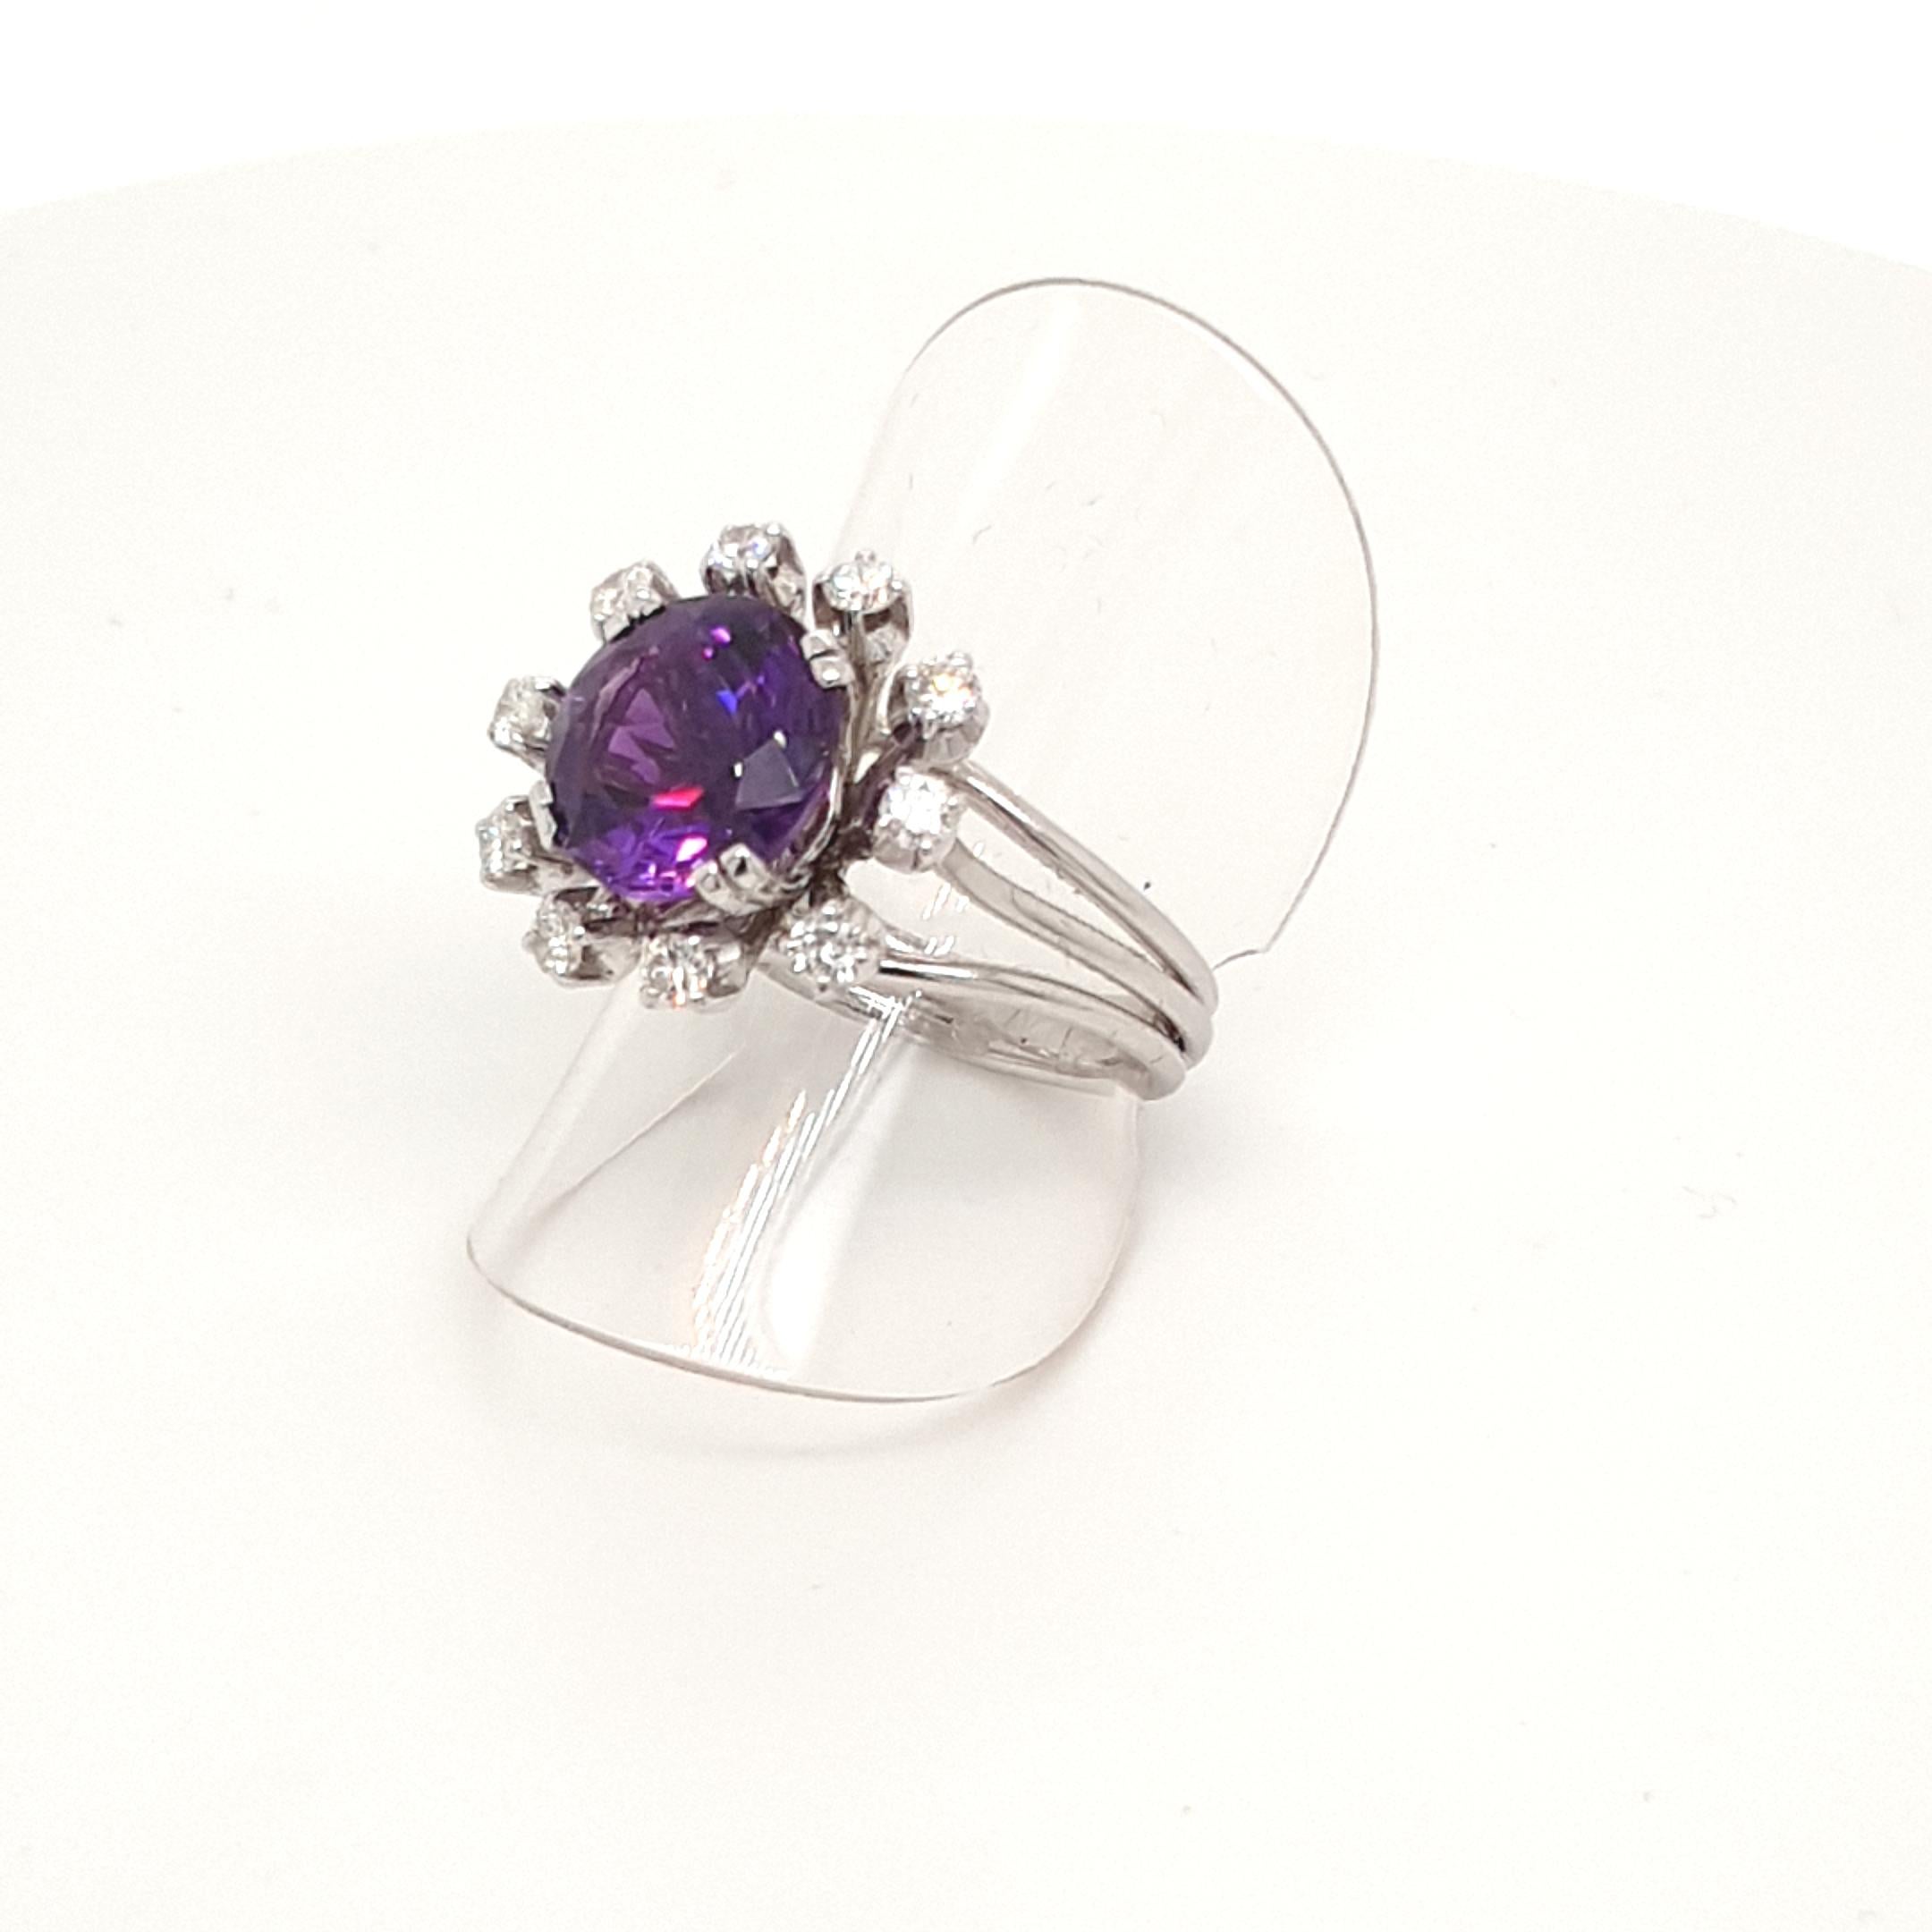 This Natural Faceted Purple Amethyst Ring with 18 Carat White Gold surrounded from 10 Diamonds is totally handmade. 
Details:
ringsize: 7 (54)
Fac. Amethyst, 10 mm round, 3.55 ct.
10 diamonds: 0,4 ct.